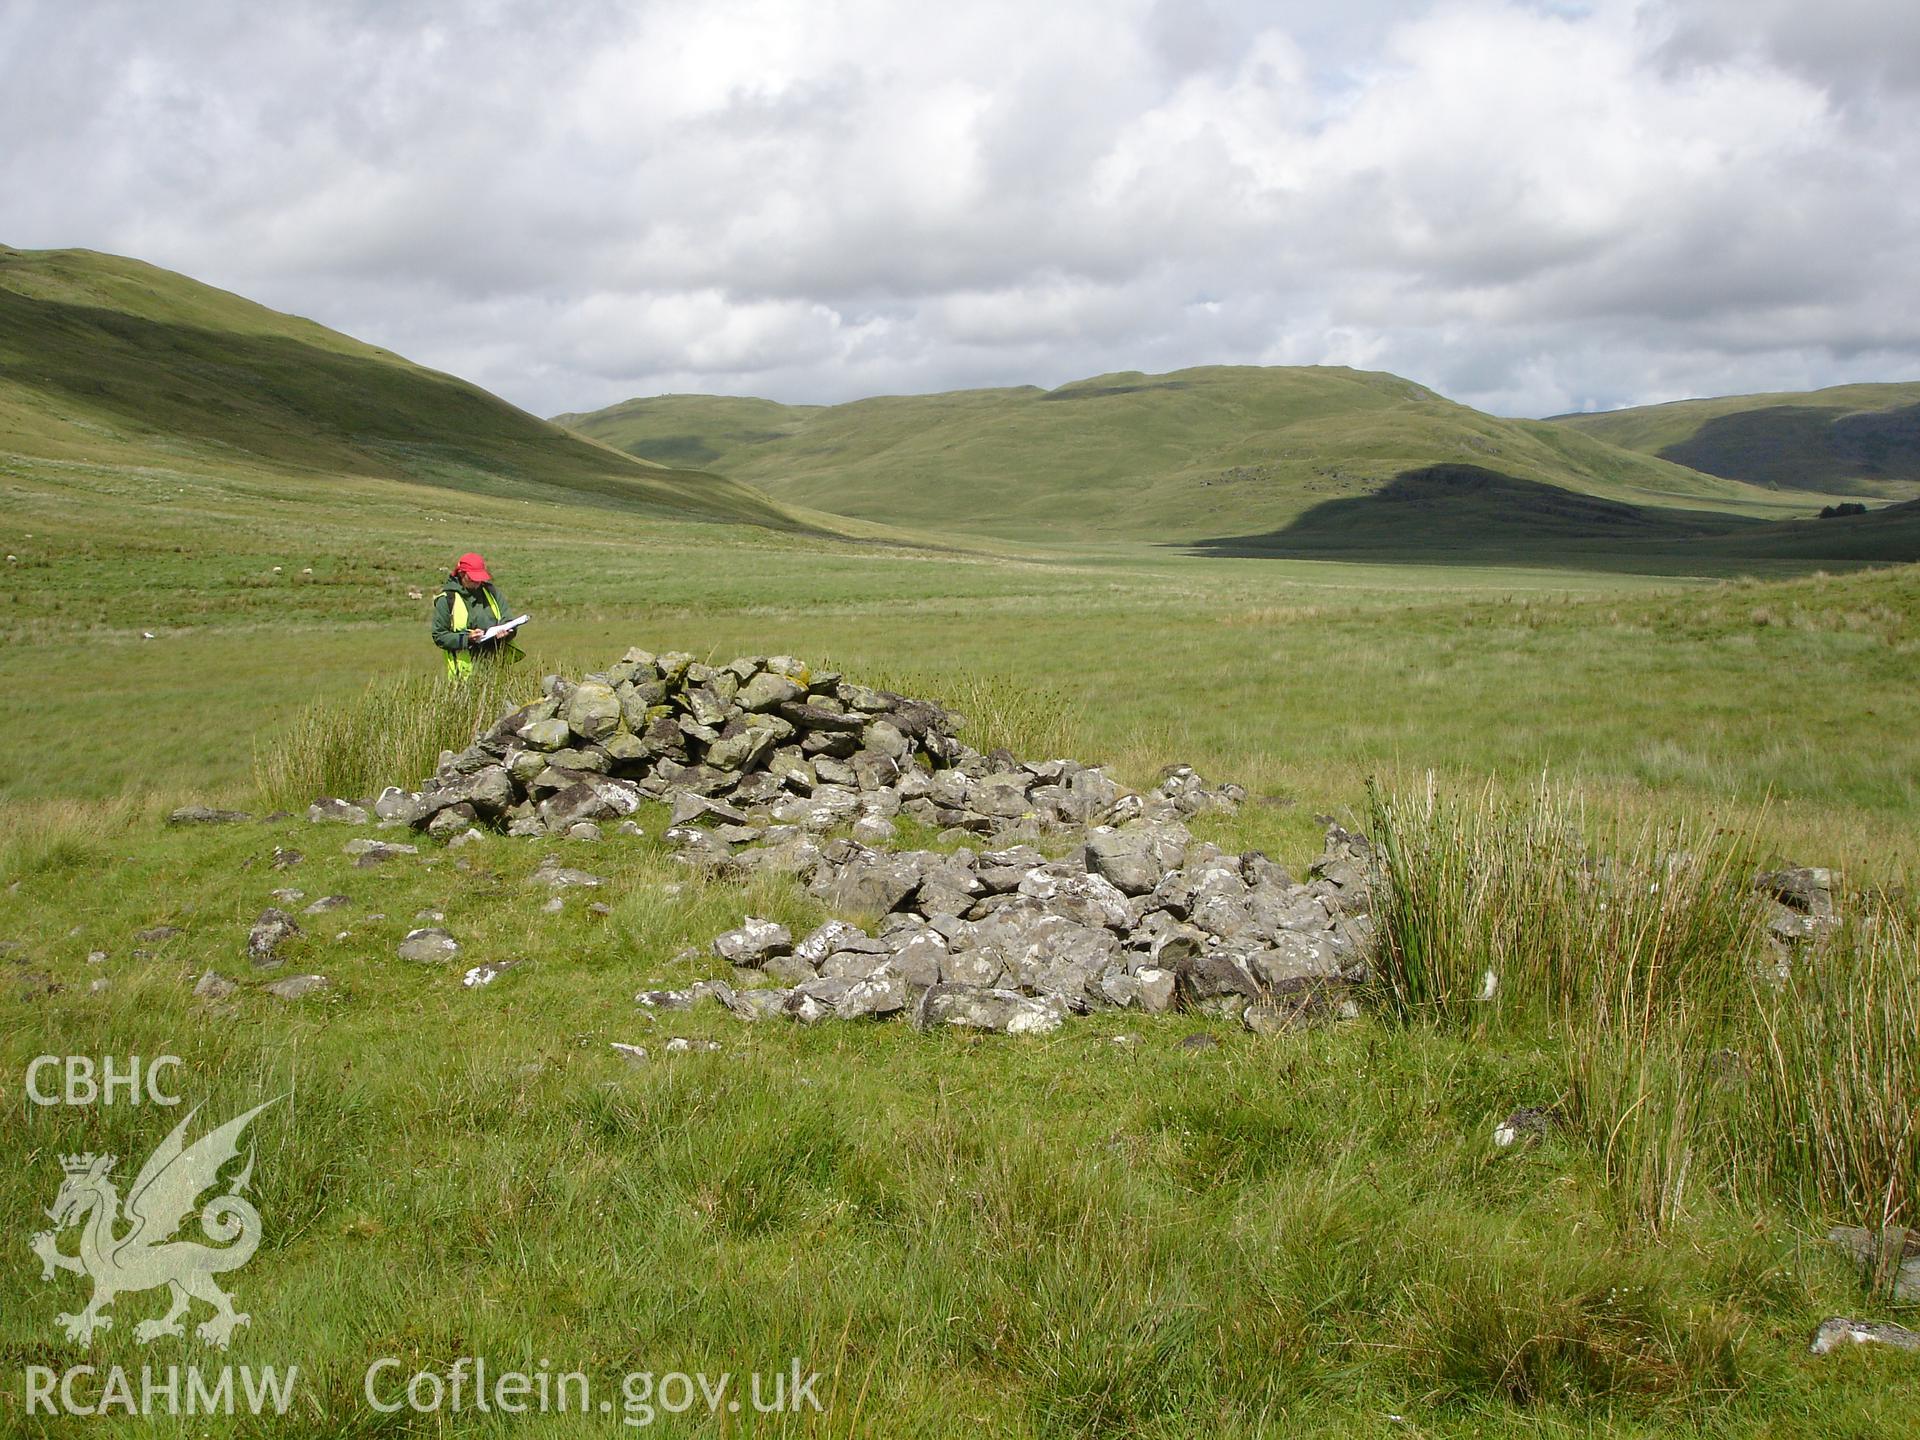 Photograph of Craig-y-Dullfan Cairn taken on 04/07/2005 by R.P. Sambrook during an Upland Survey undertaken by Trysor Archaeology.